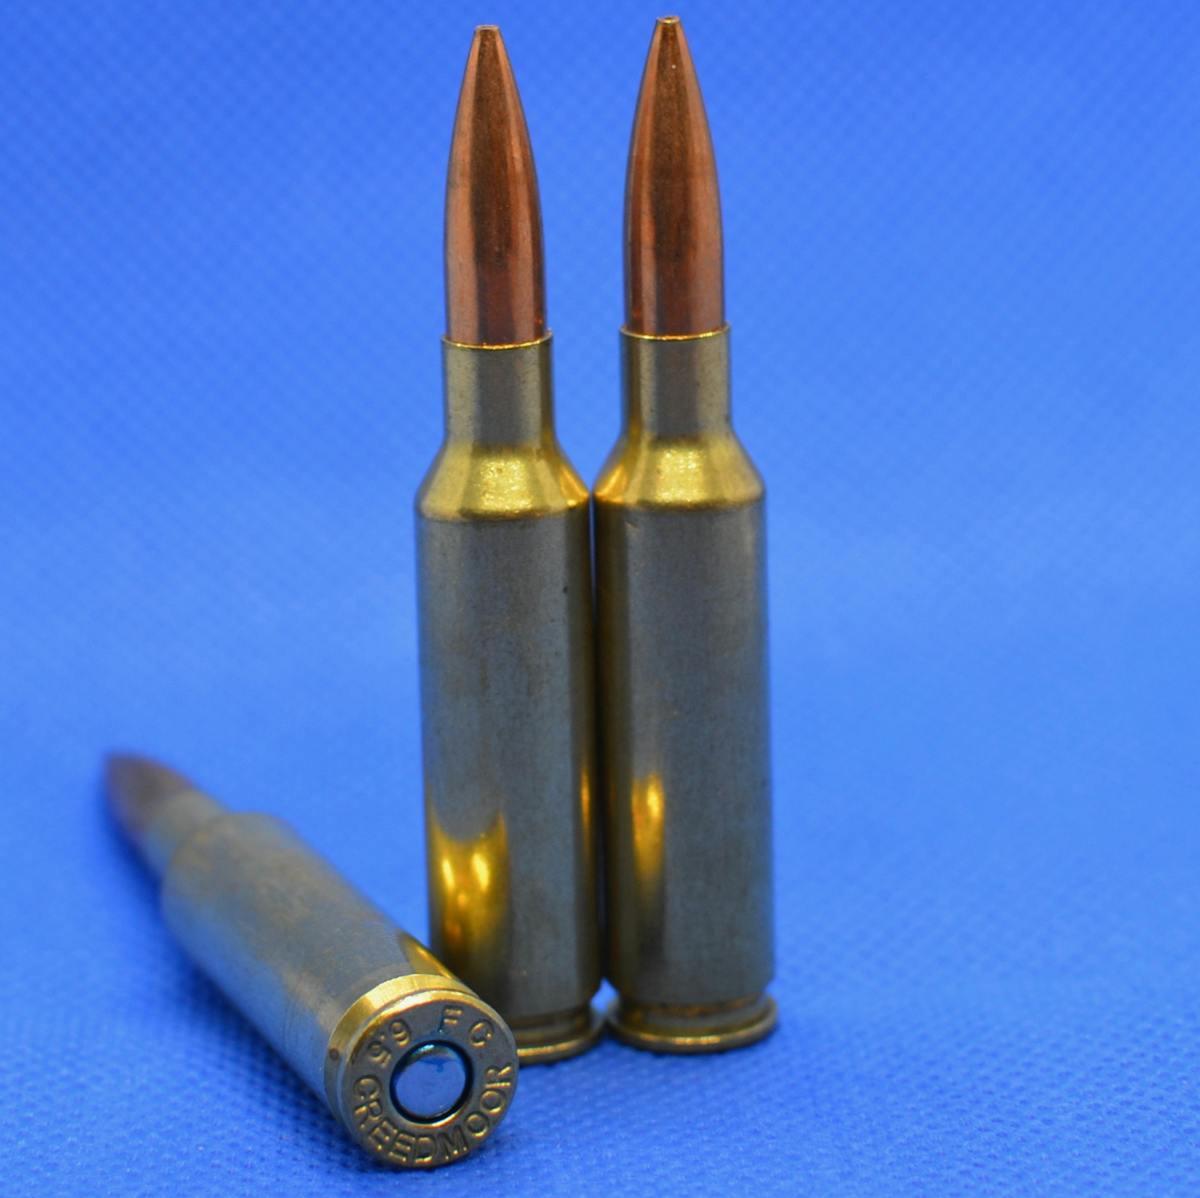 The 6.5 Creedmor has a 30 degree shoulder. The neck allows for the longer, and usually higher ballistic coefficient, bullets. Shown here are the Federal Premium 6.5 Creedmor cartridges with 140 grain Sierra MatchKing bullets.